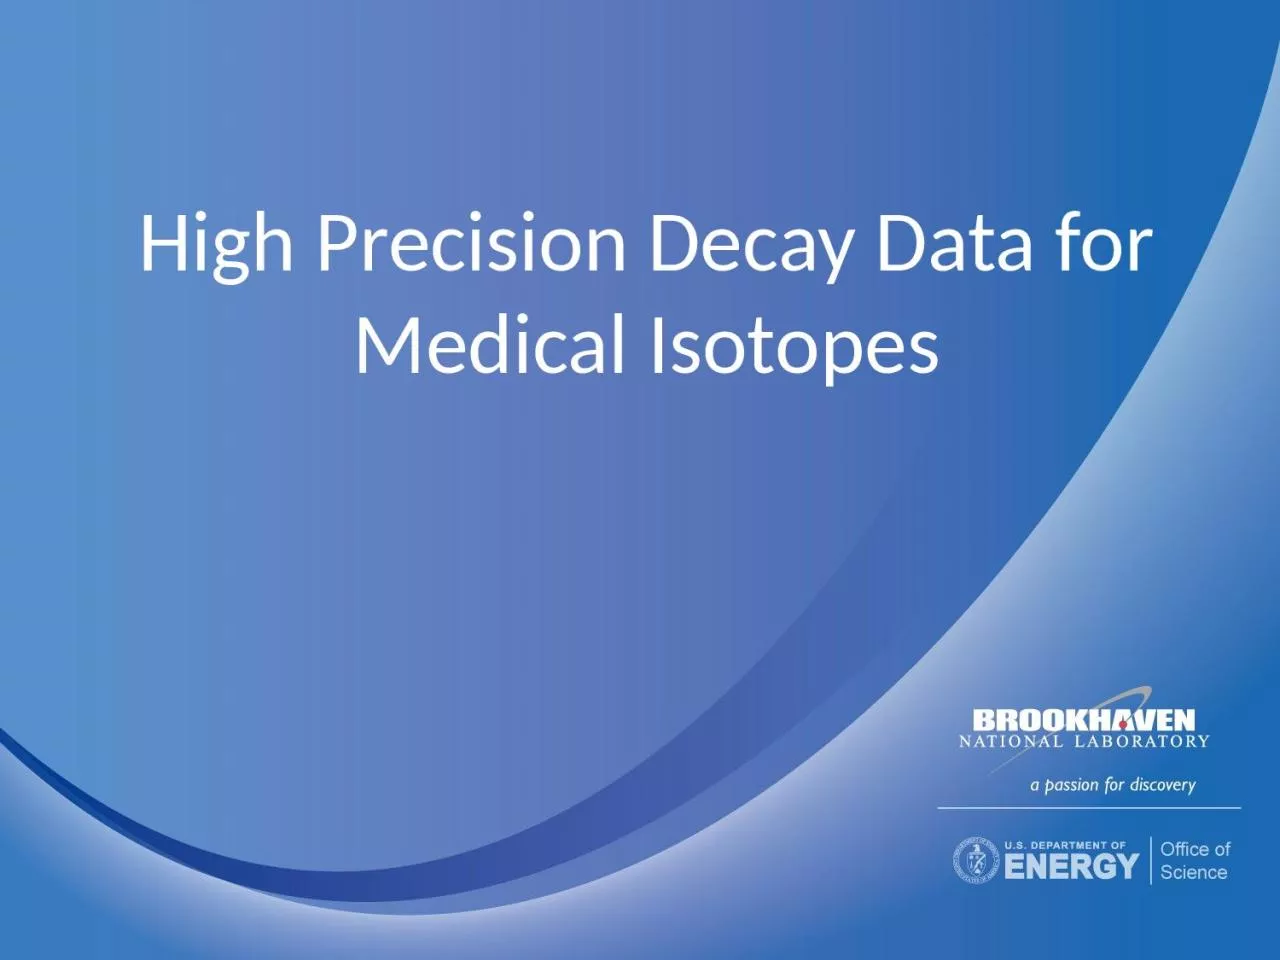 High Precision Decay Data for Medical Isotopes